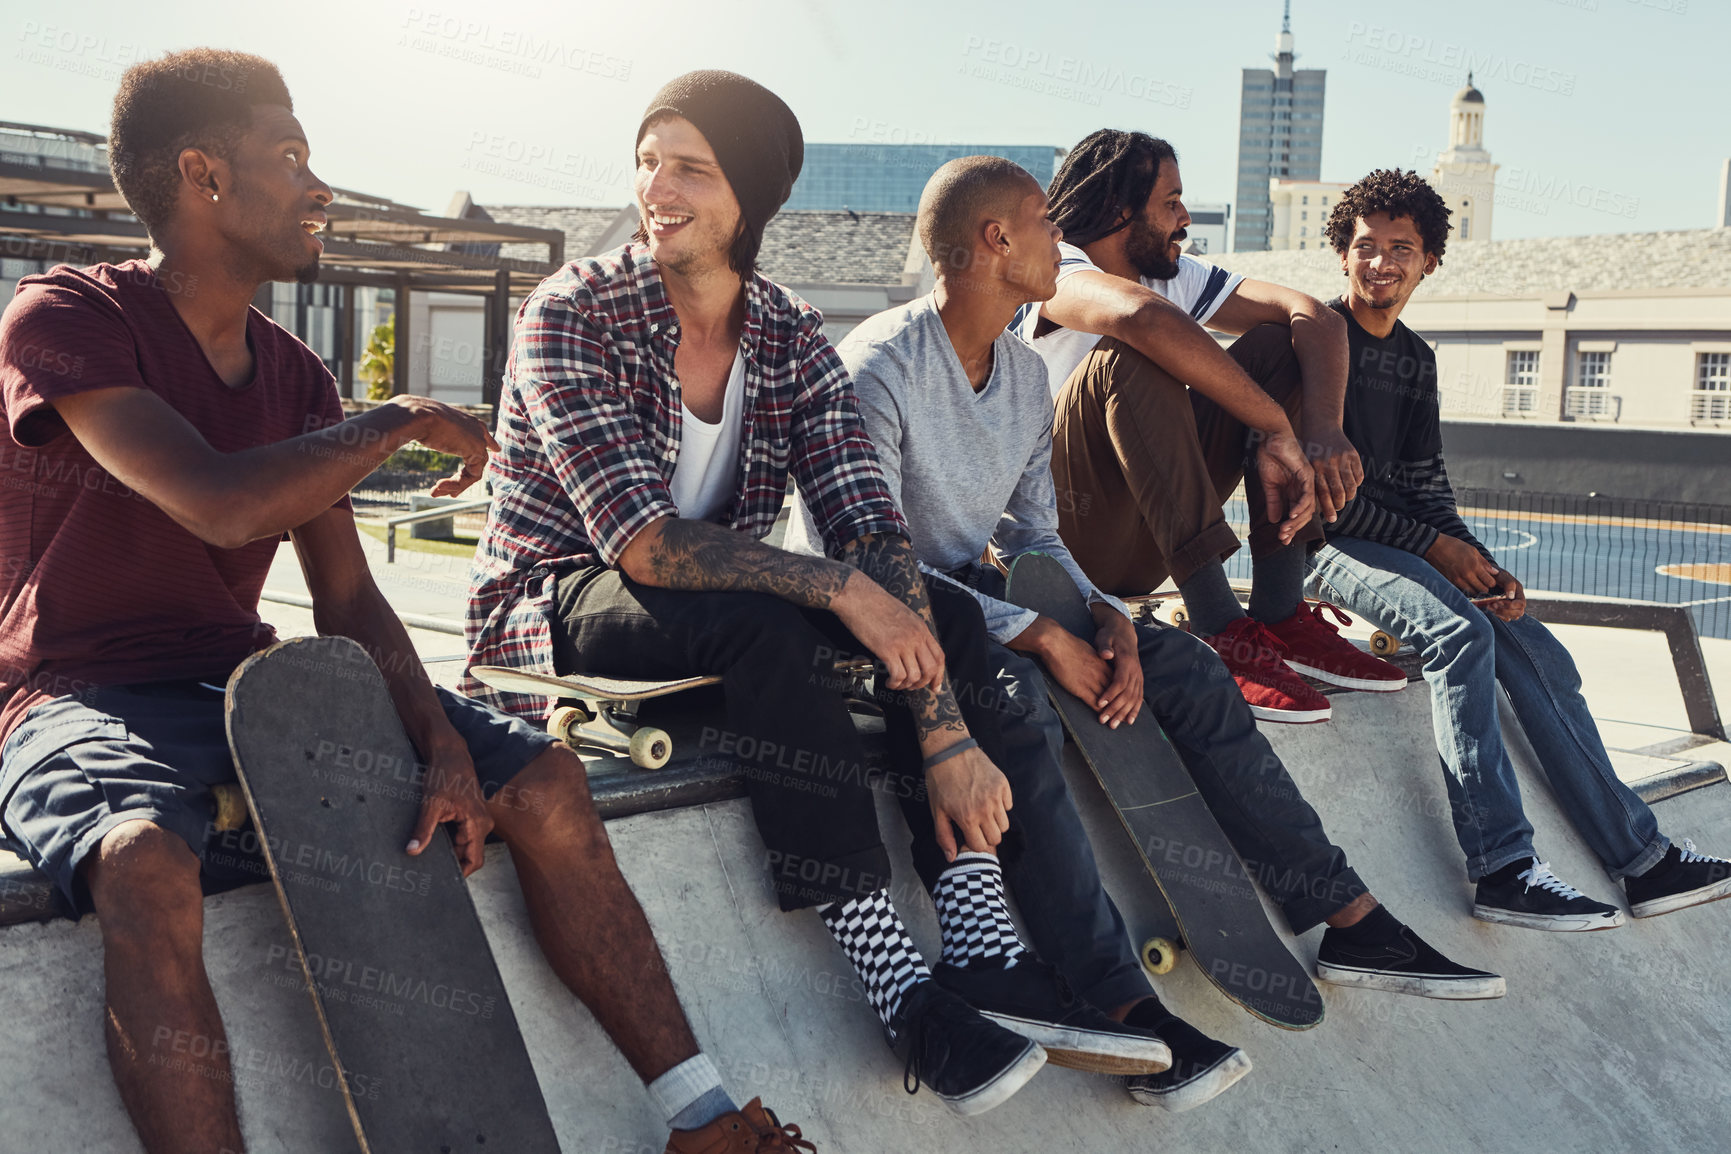 Buy stock photo Shot of a group of friends sitting together on a ramp at a skatepark